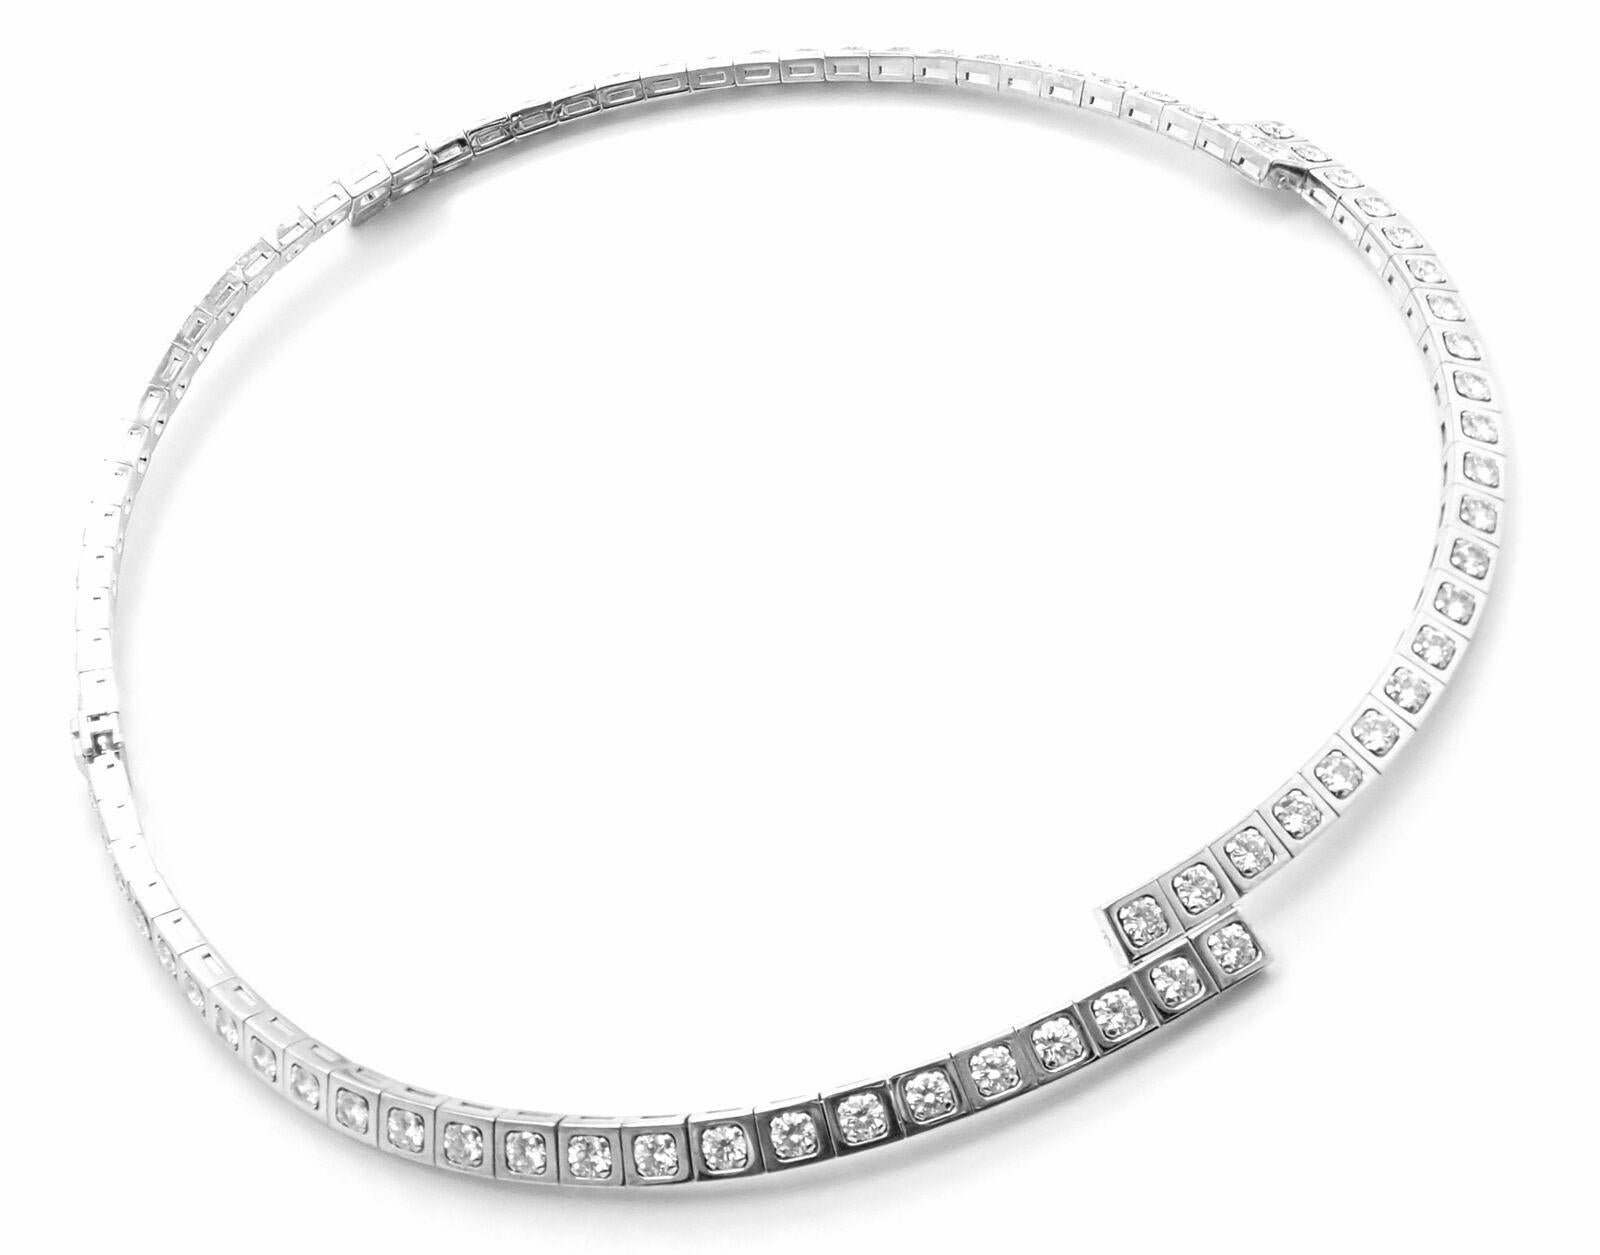 18k White Gold Diamond Tectonique Tennis Necklace by Cartier. 
With 85 Round Brilliant Cut Diamonds VVS1clarity, E color total weight approximately 13.6ct
Details: 
Length: 17